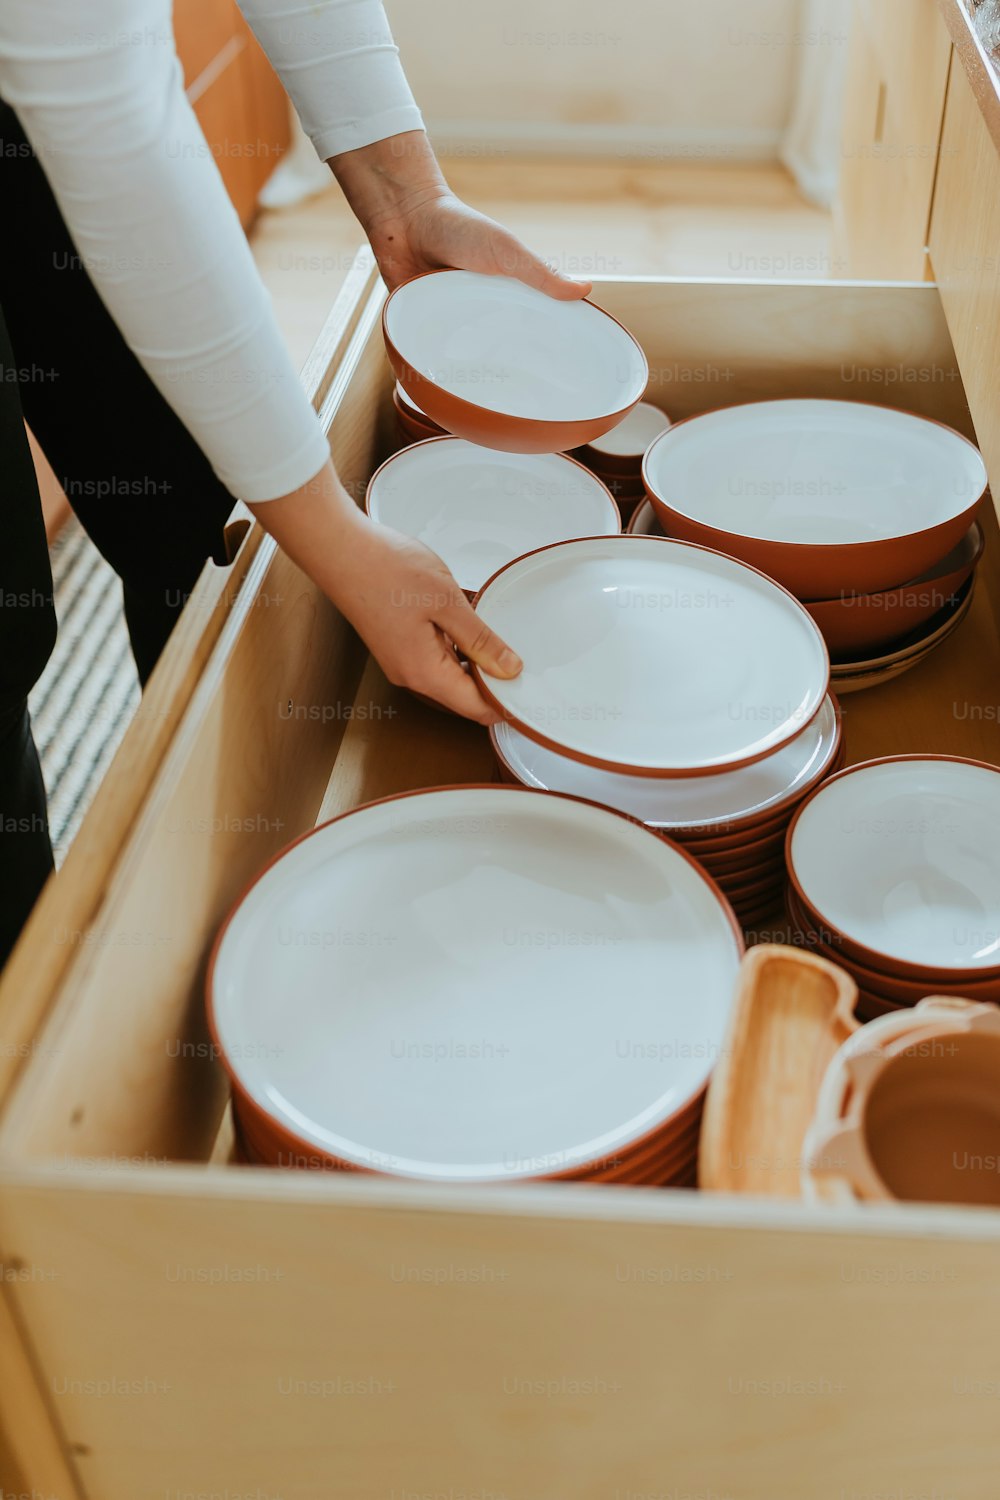 a person holding a box full of plates